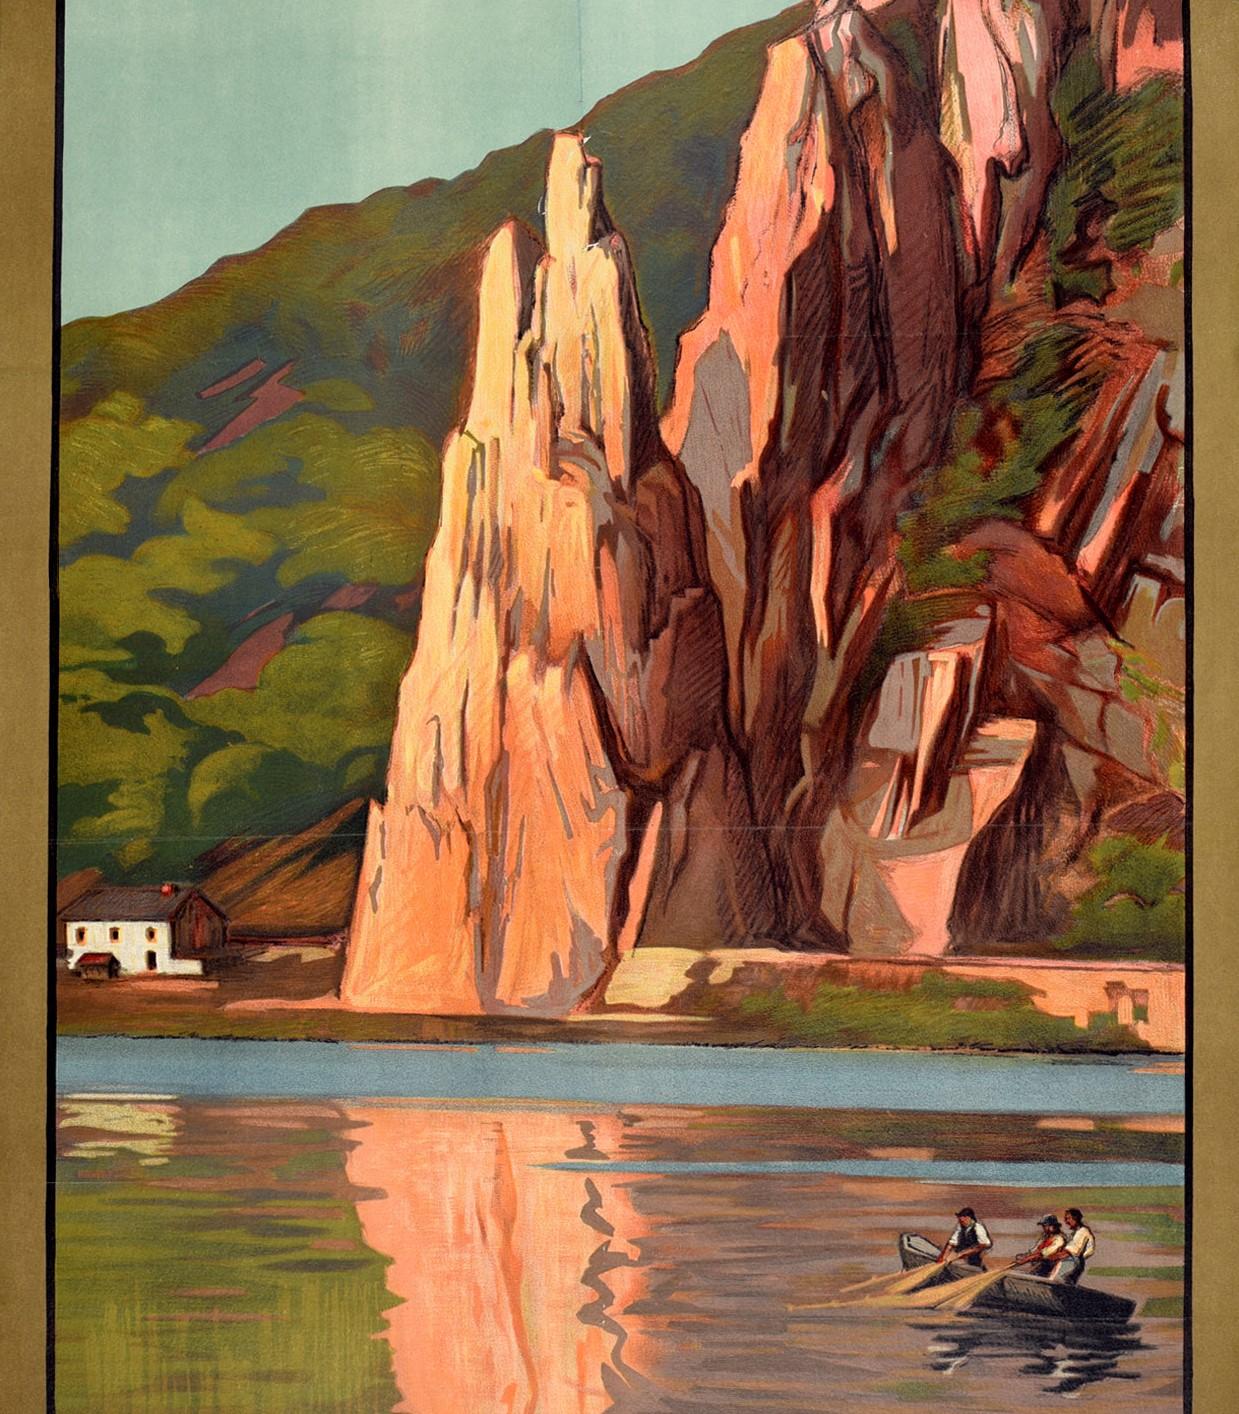 Original Vintage Railway Travel Poster Dinant Sur Meuse Rocher Bayard Rock Belge In Good Condition For Sale In London, GB